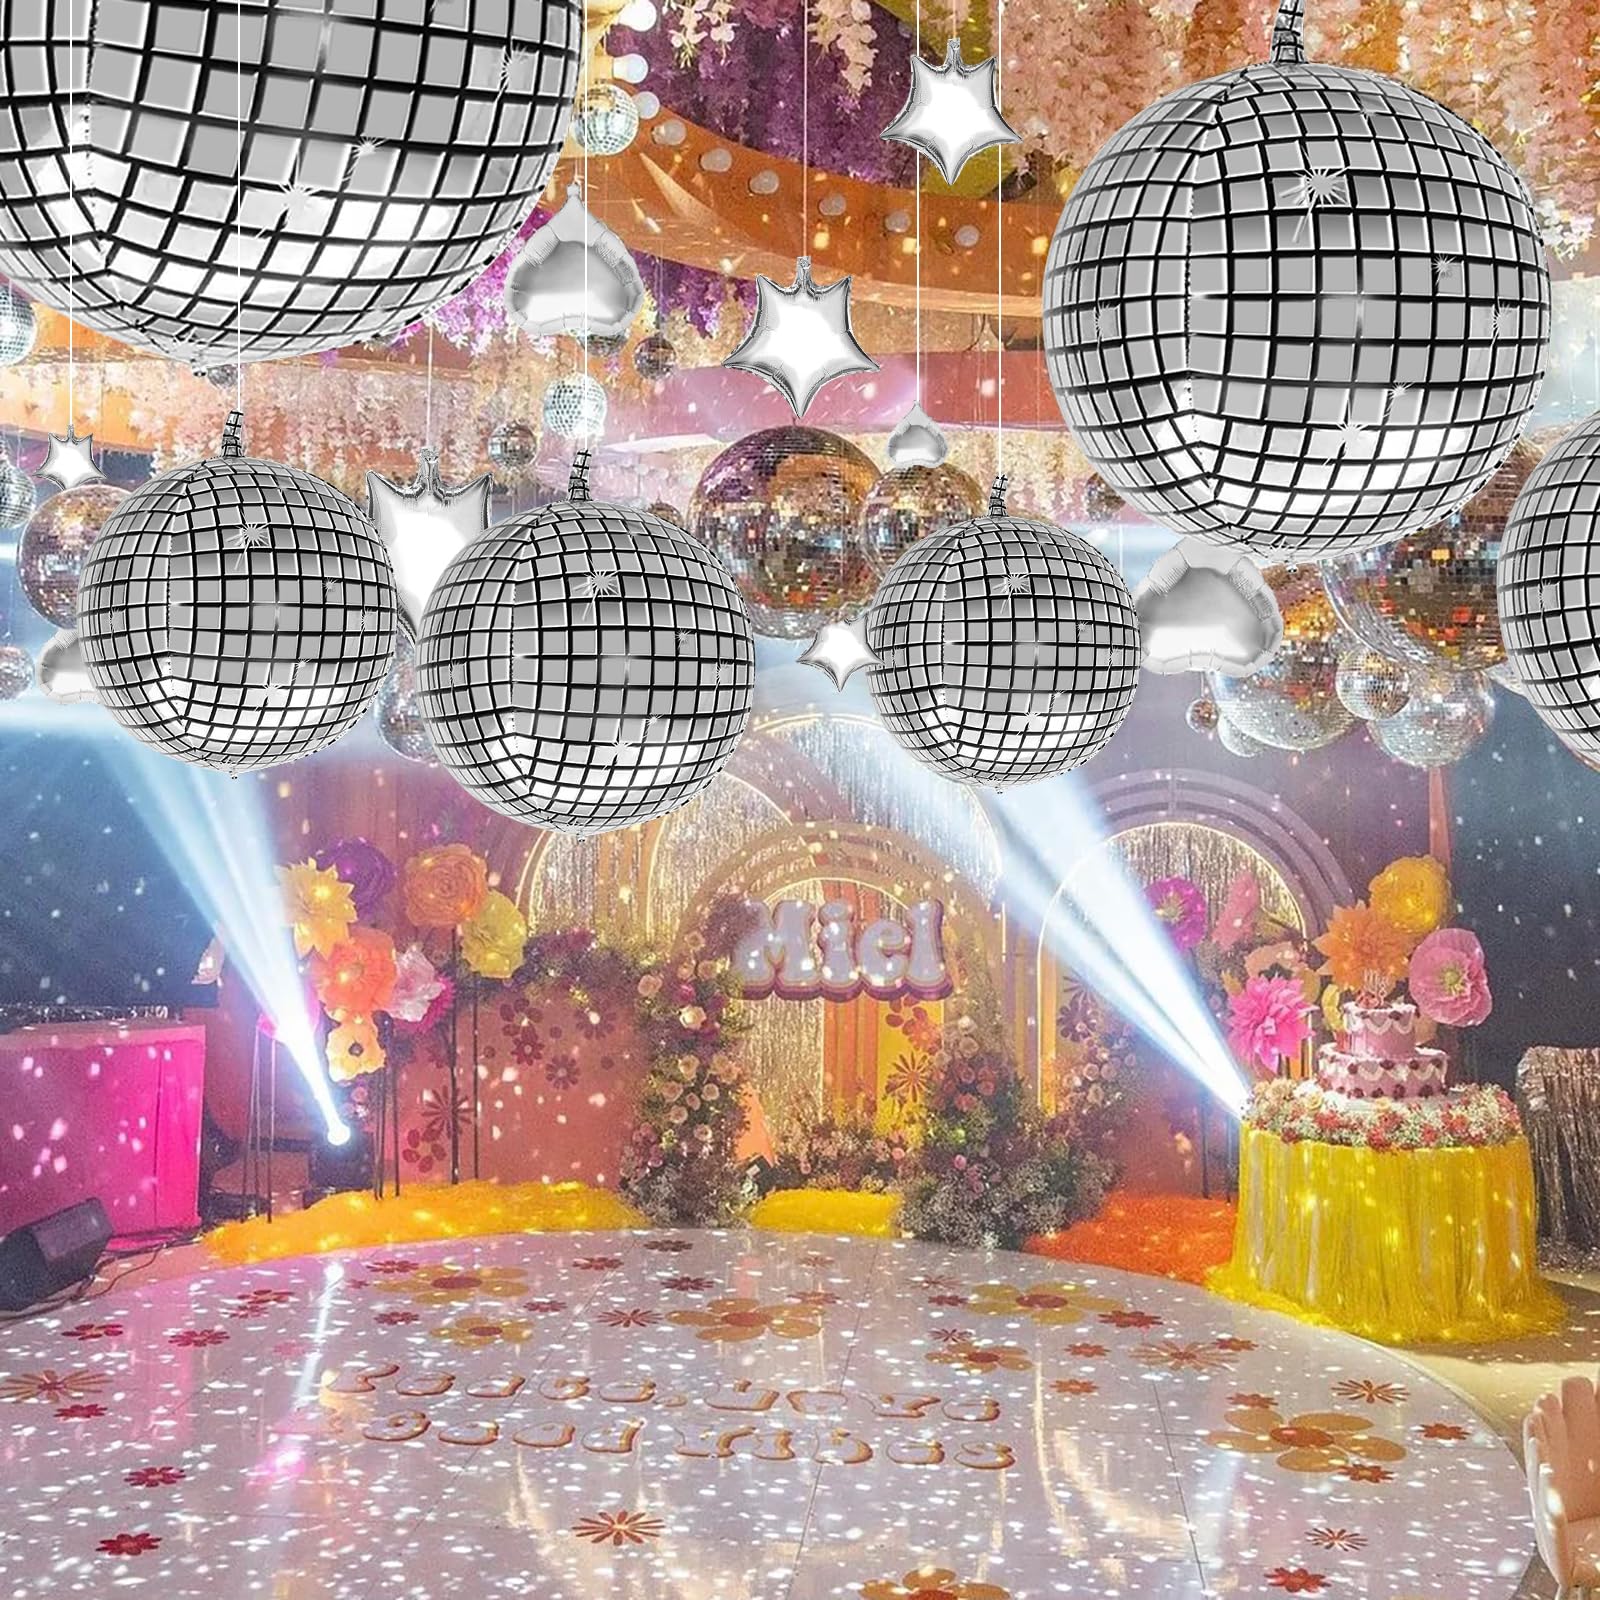 Jerbor 60PCS Disco Ball Balloons with Pump,4D Disco Party Decorations,Love-Shaped Star-Shaped Balloons,Silver Disco Mylar Balloons for 70s 80s Disco Themed Birthday New Year's Party Decor Supplies